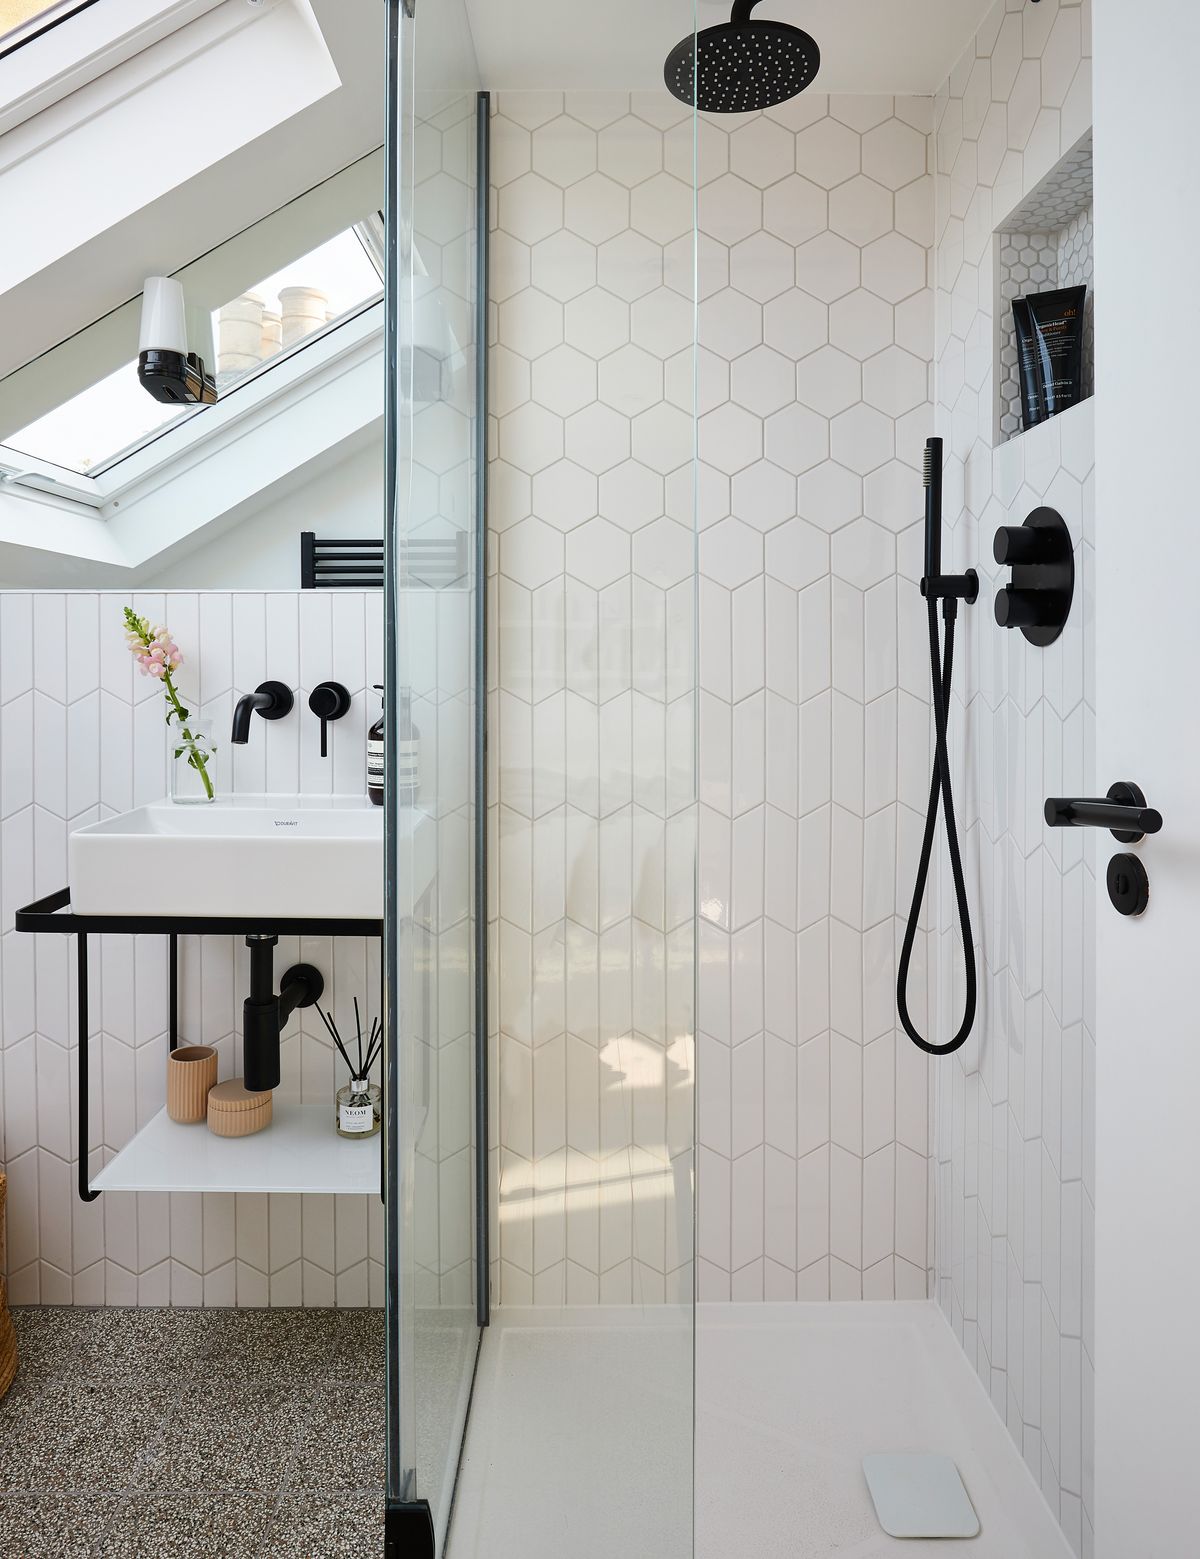 Shower power: Our guide to buys that could transform your bathroom